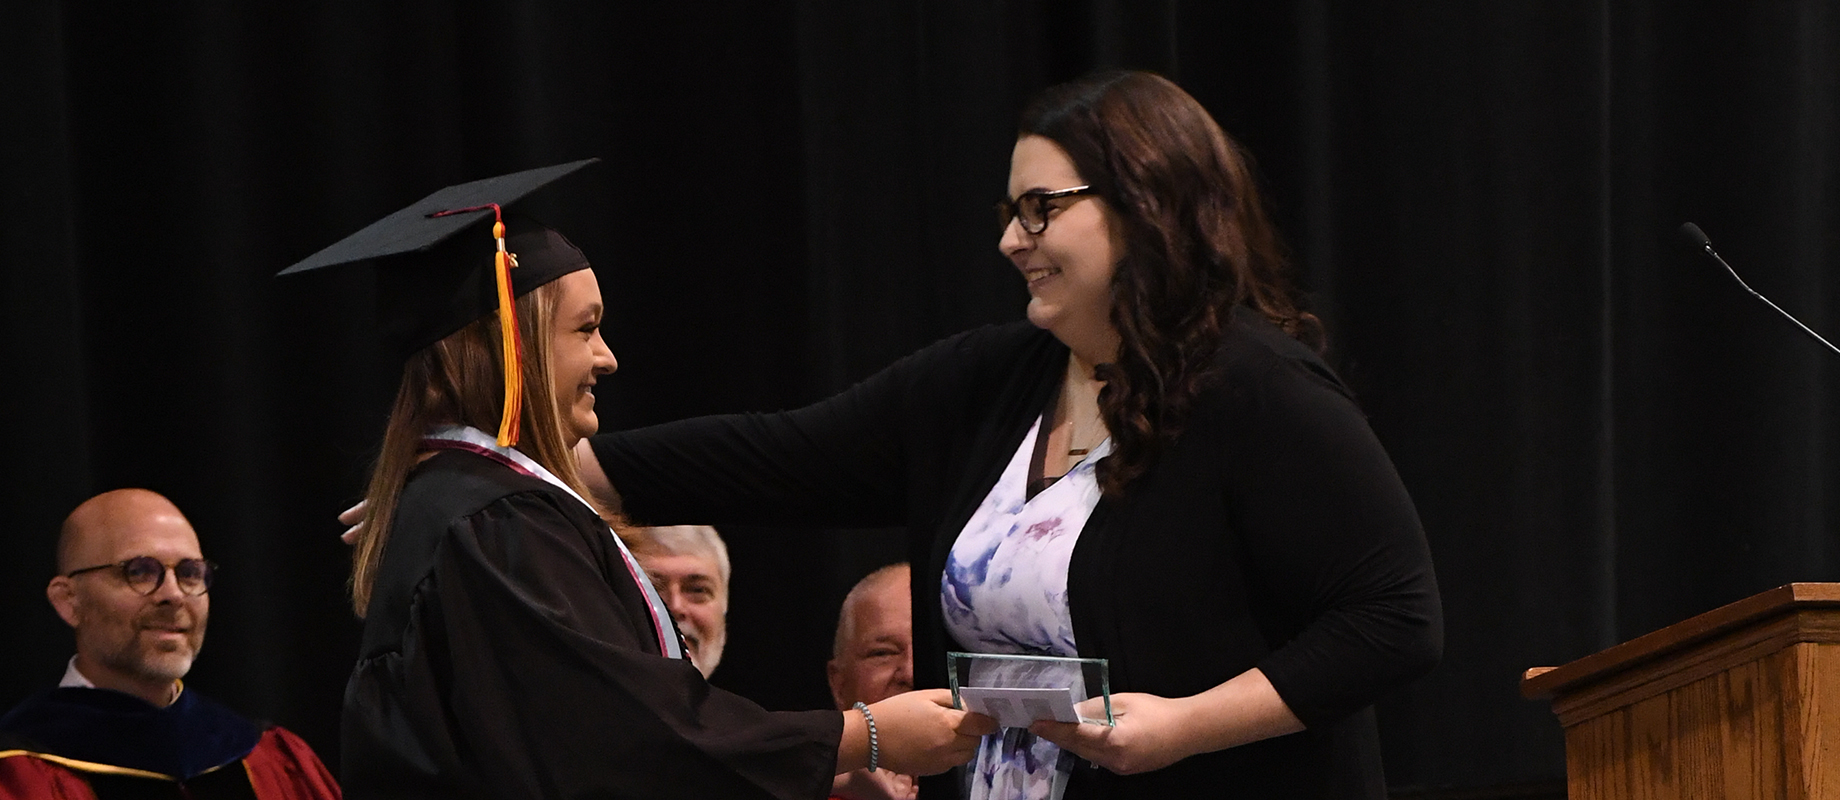 Elyse Morris '11 earned the Staff Student Impact Award at the 2019 commencement ceremony.